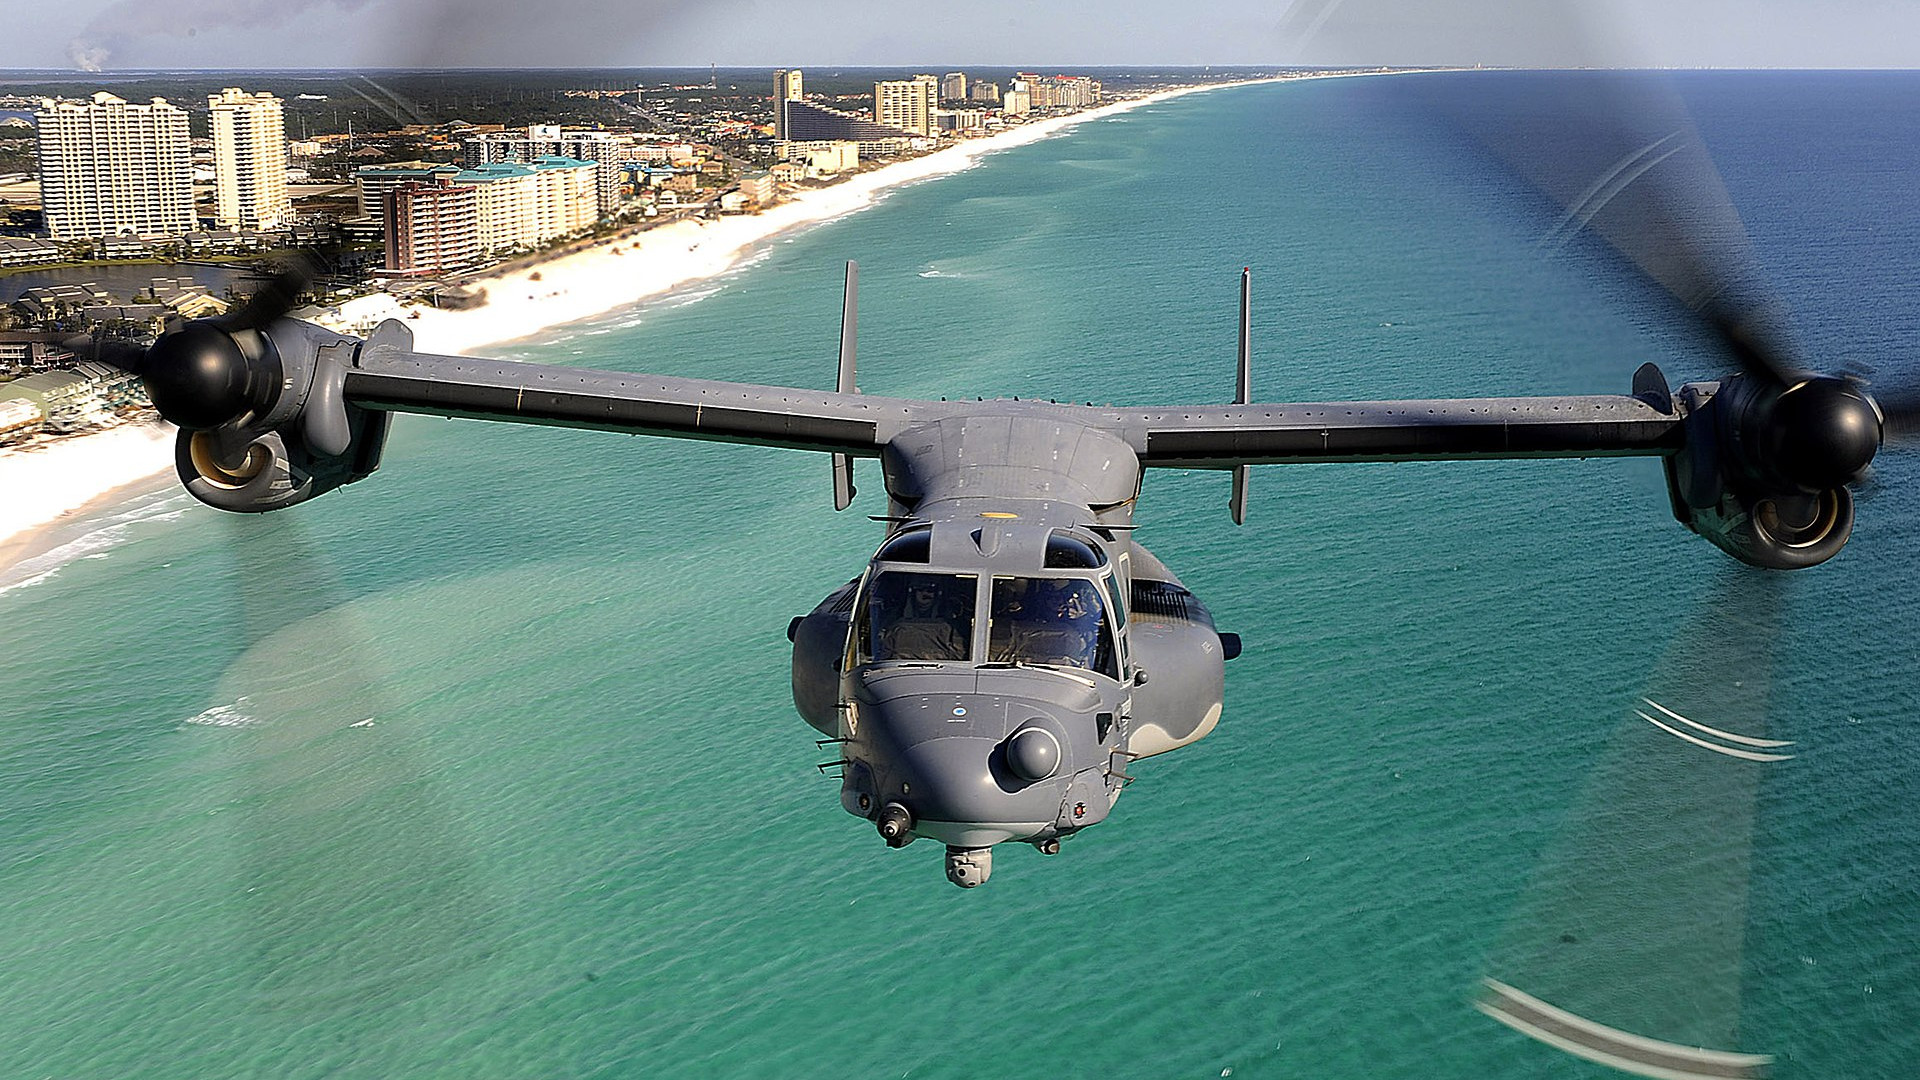 Bell Boeing V-22 Osprey. By DOD photo by Senior Airman Julianne Showalter, U.S. Air Force. (Released) - defenseimagery.mil, Public Domain, https://commons.wikimedia.org/w/index.php?curid=5873570